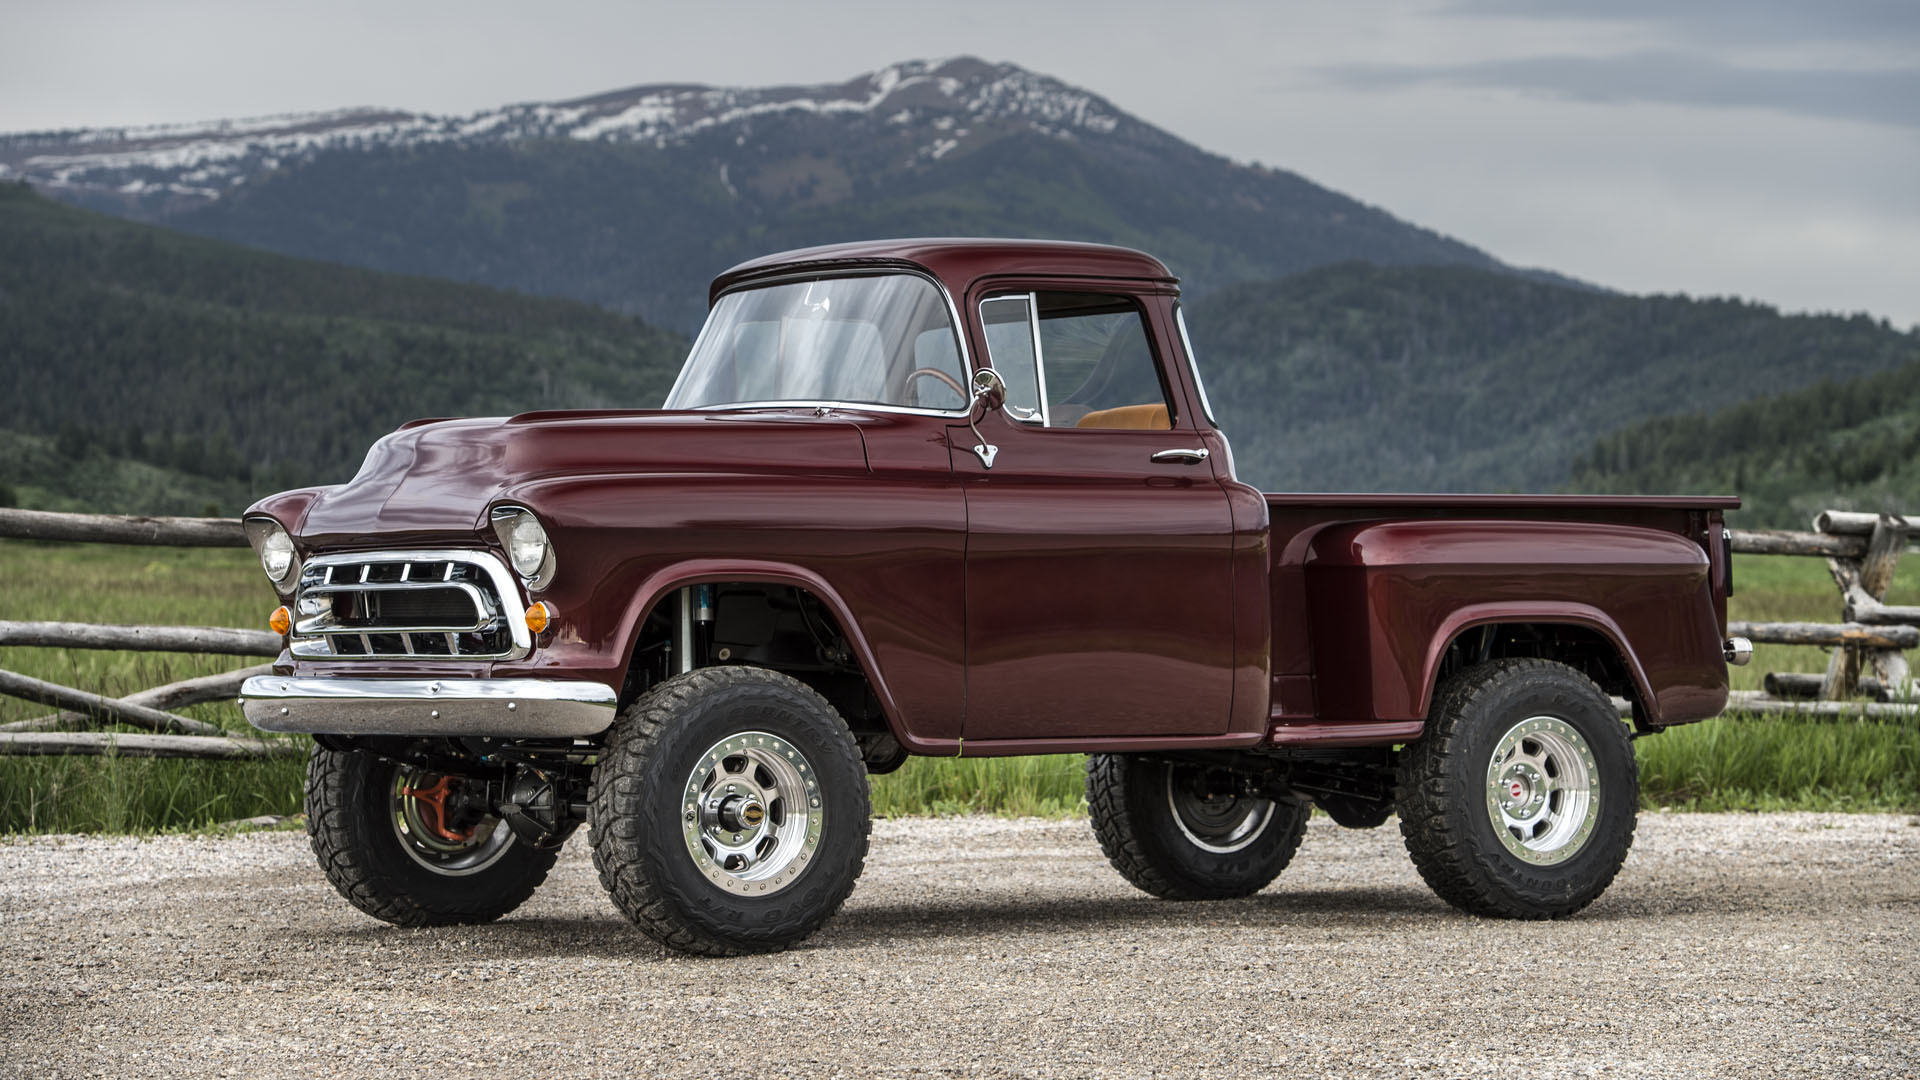 Legacy Napco Conversion Is Half Task Force Pickup Truck